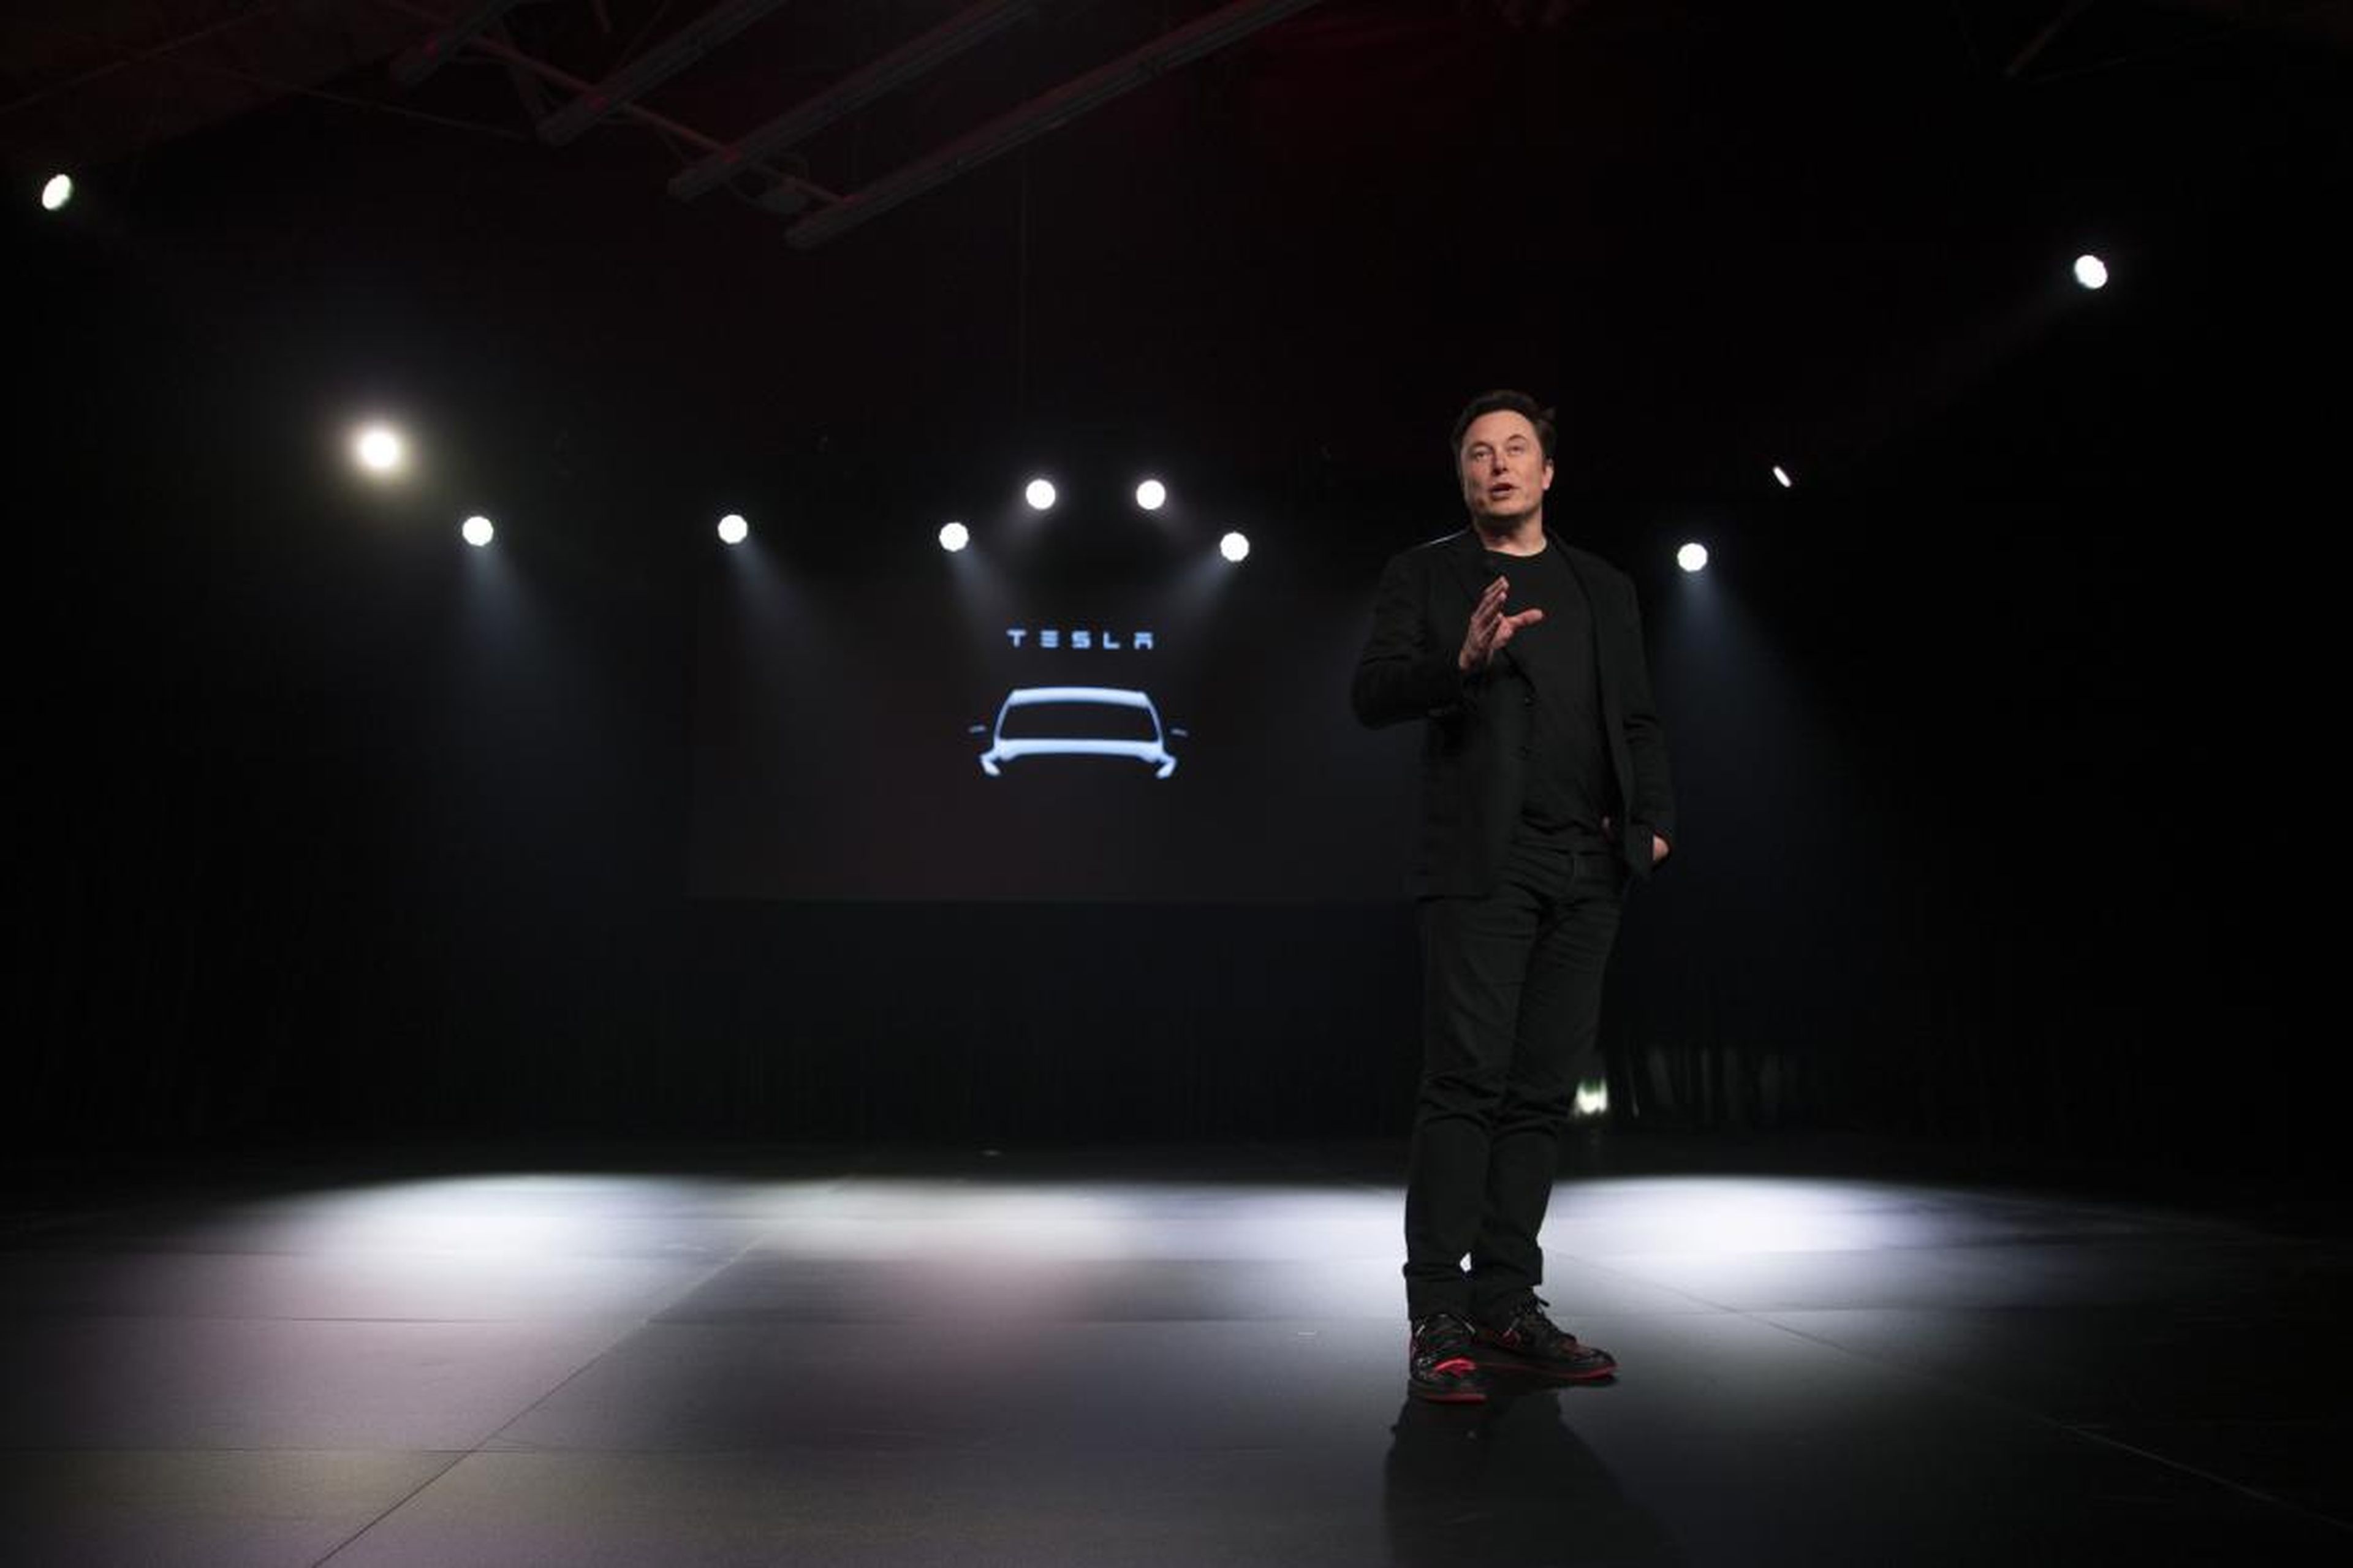 Tesla CEO Elon Musk speaks before unveiling the Model Y at Tesla's design studio Thursday, March 14, 2019, in Hawthorne, Calif. The Model Y may be Tesla's most important product yet as it attempts to expand into the mainstream and